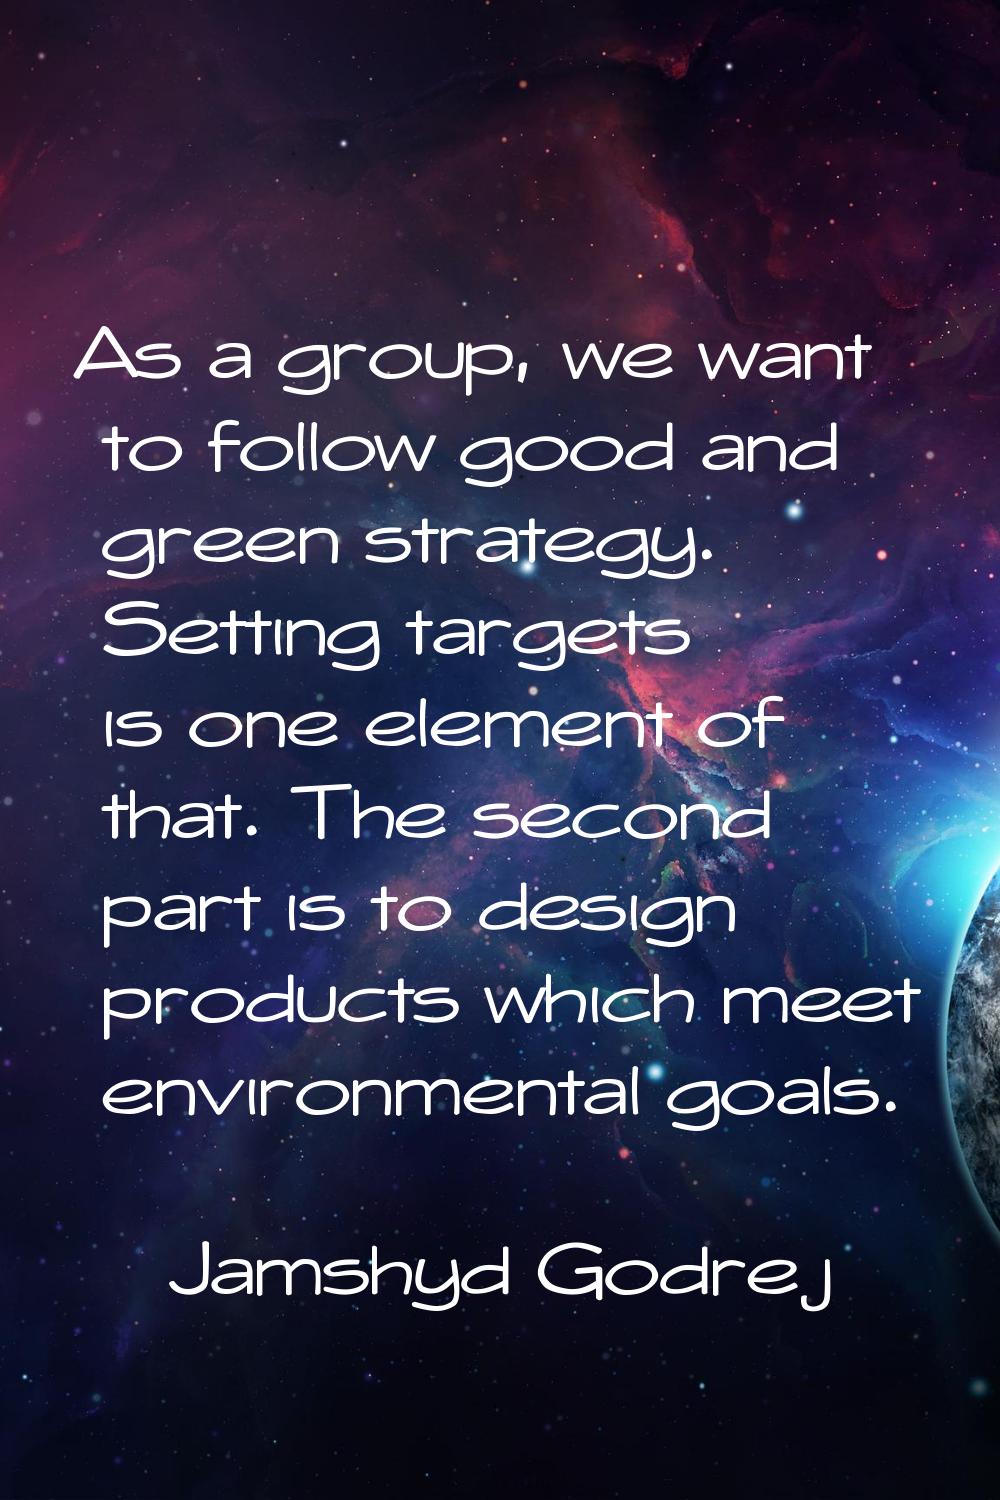 As a group, we want to follow good and green strategy. Setting targets is one element of that. The 